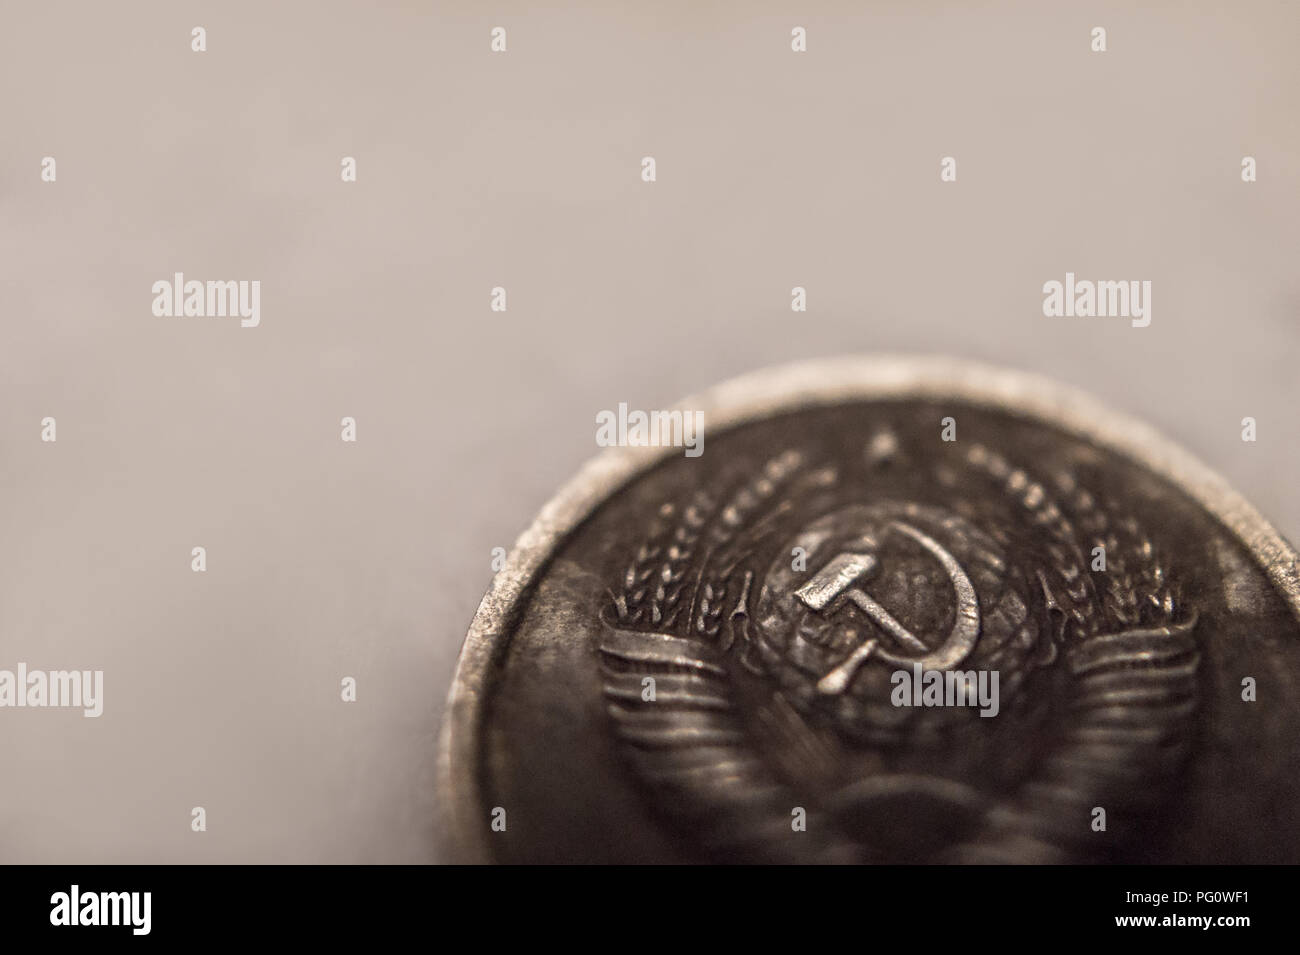 Closeup Of The USSR Coat Of Arms On The Old Soviet Copper Coin Stock Photo